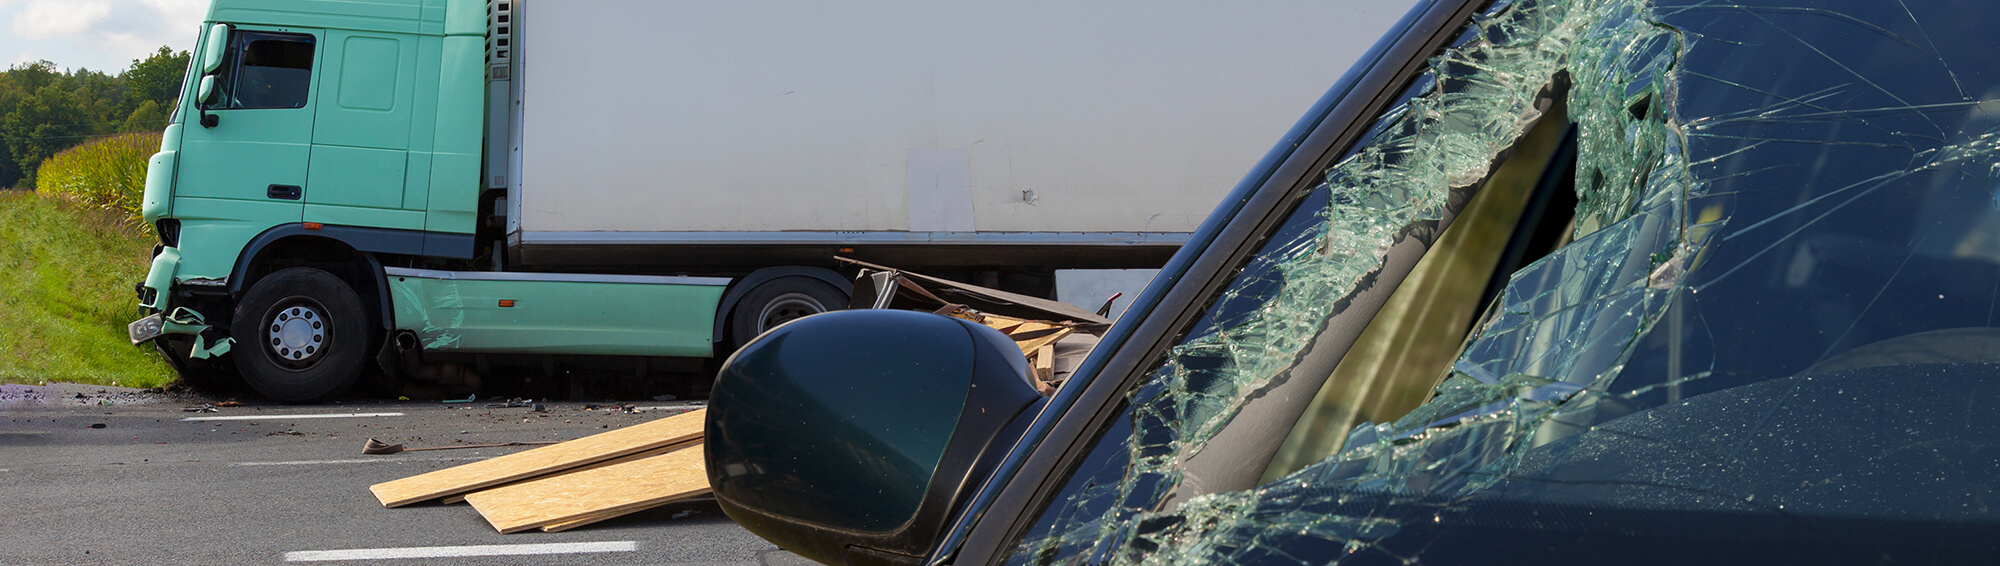 Truck Accident Injury? The Law Firm You Choose Matters.